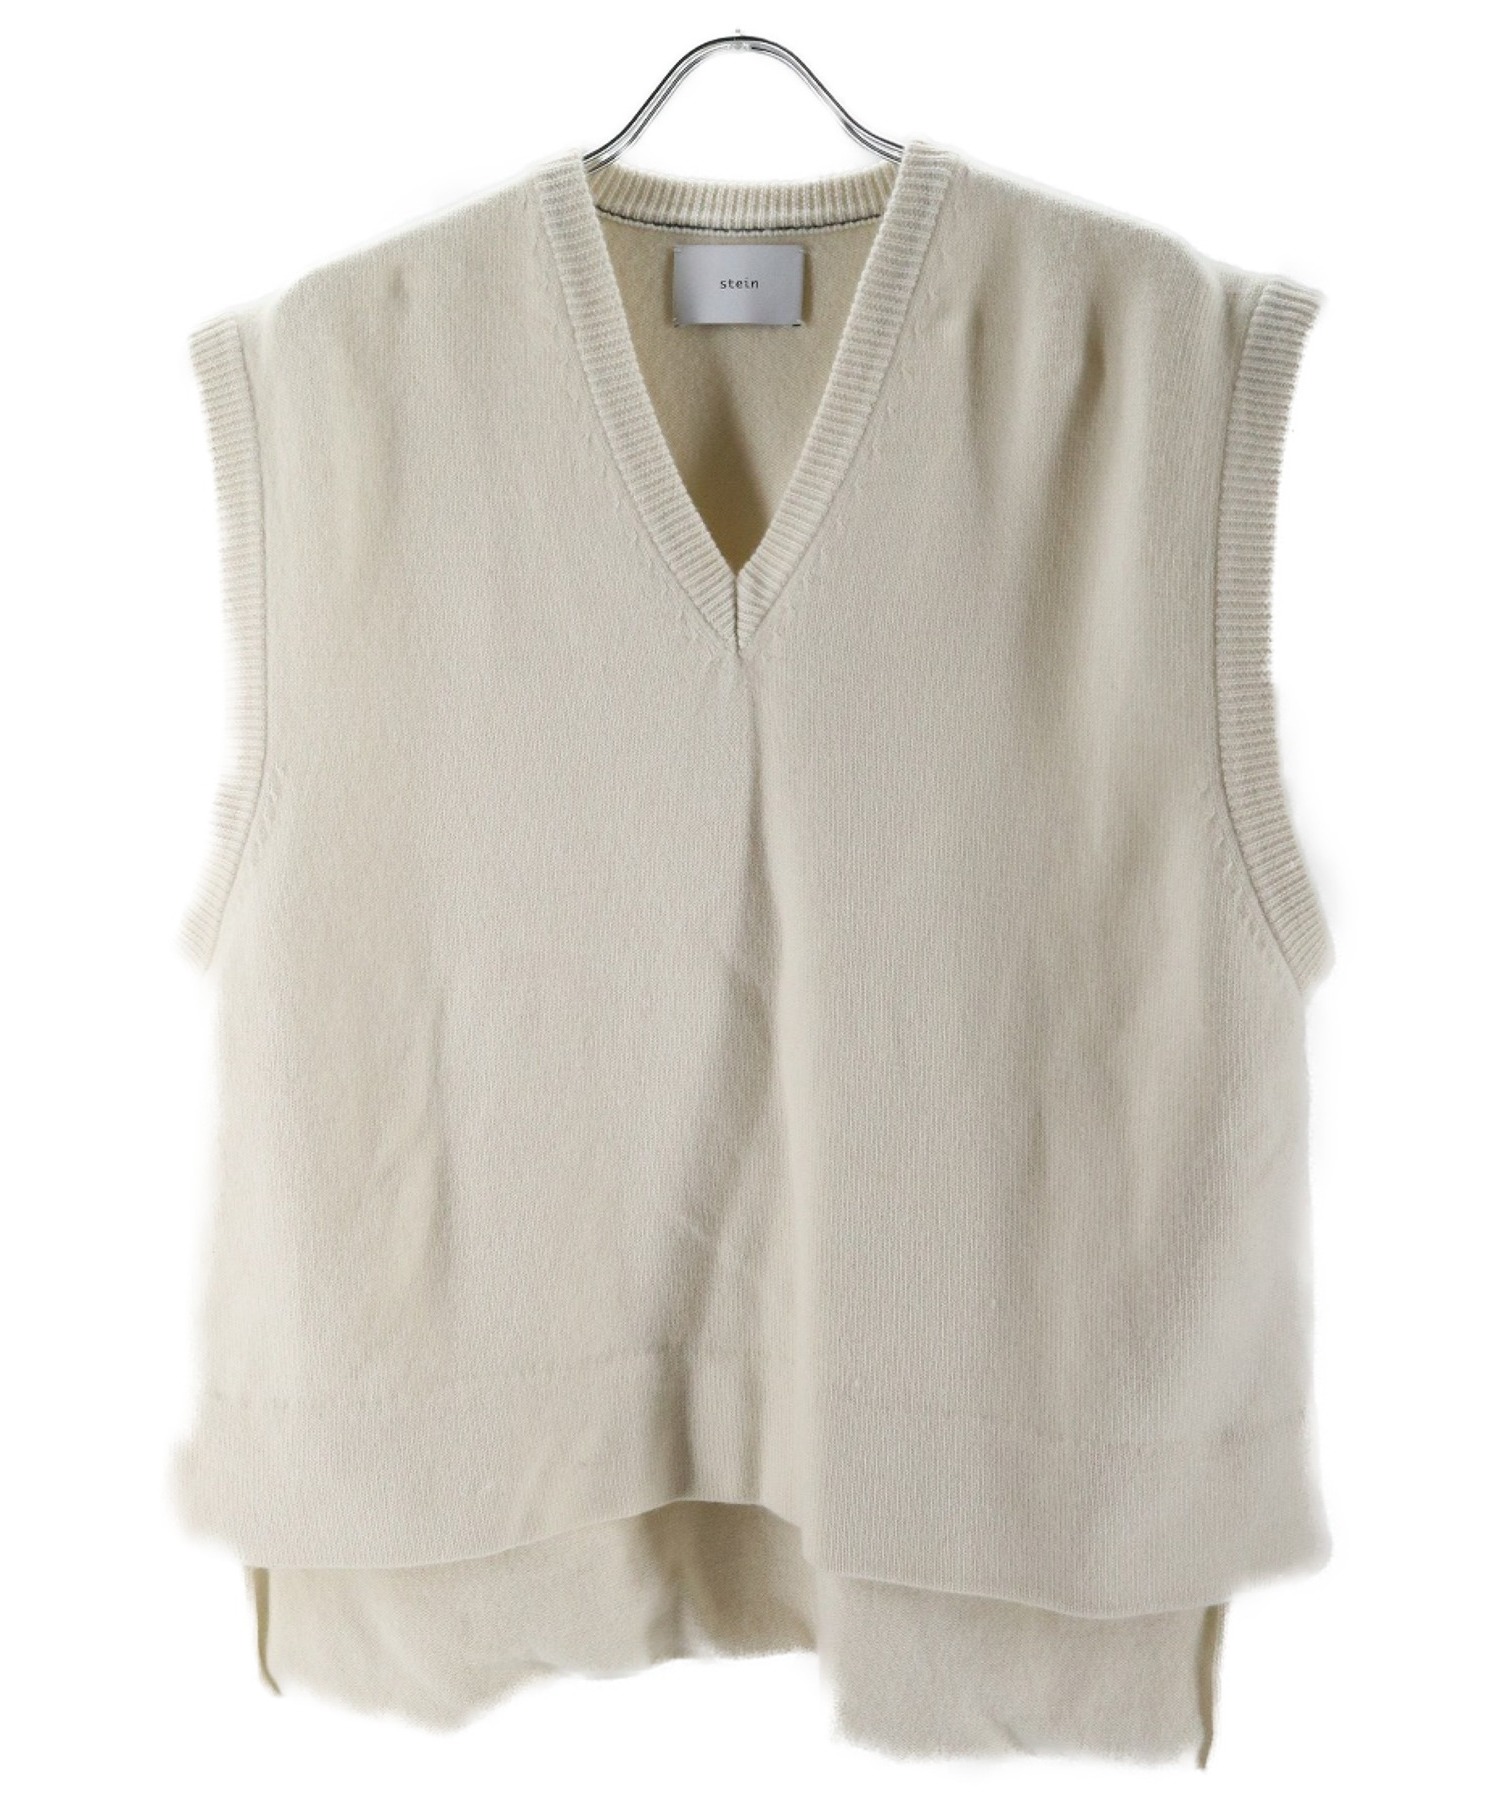 stein 19aw BACK DOUBLE KNIT VEST